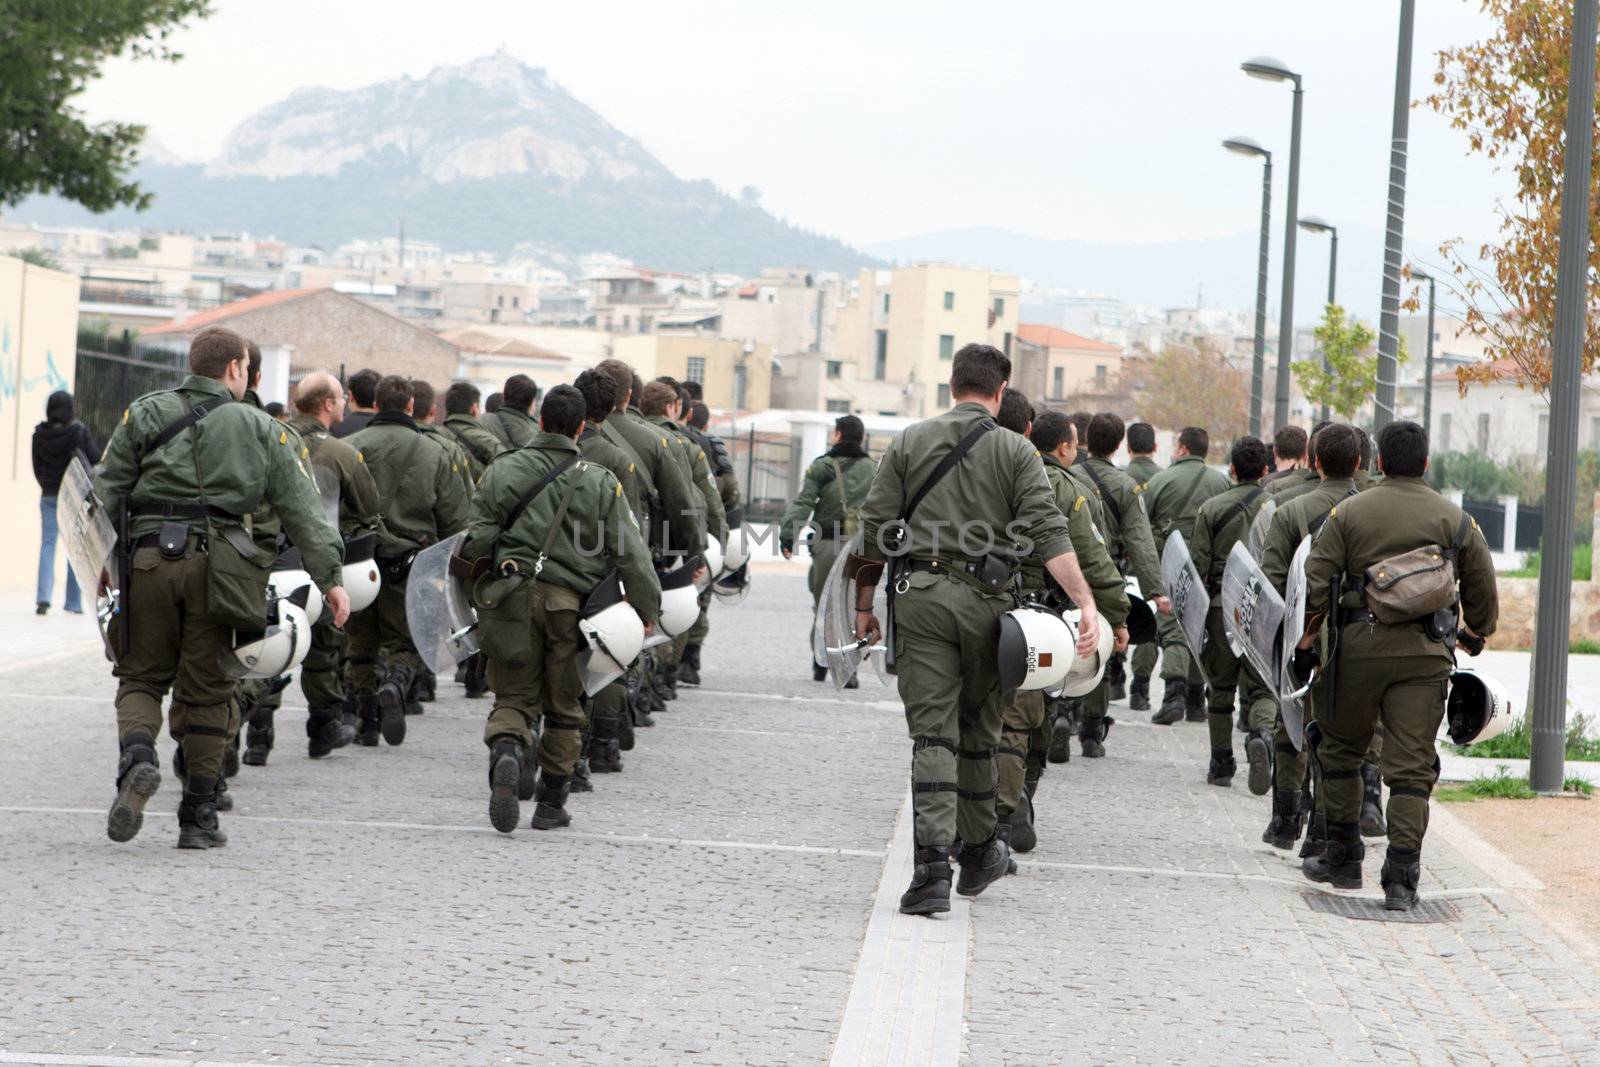 special police forces walking in athens greece just before the big manifestation in athens greece 6th December 2008